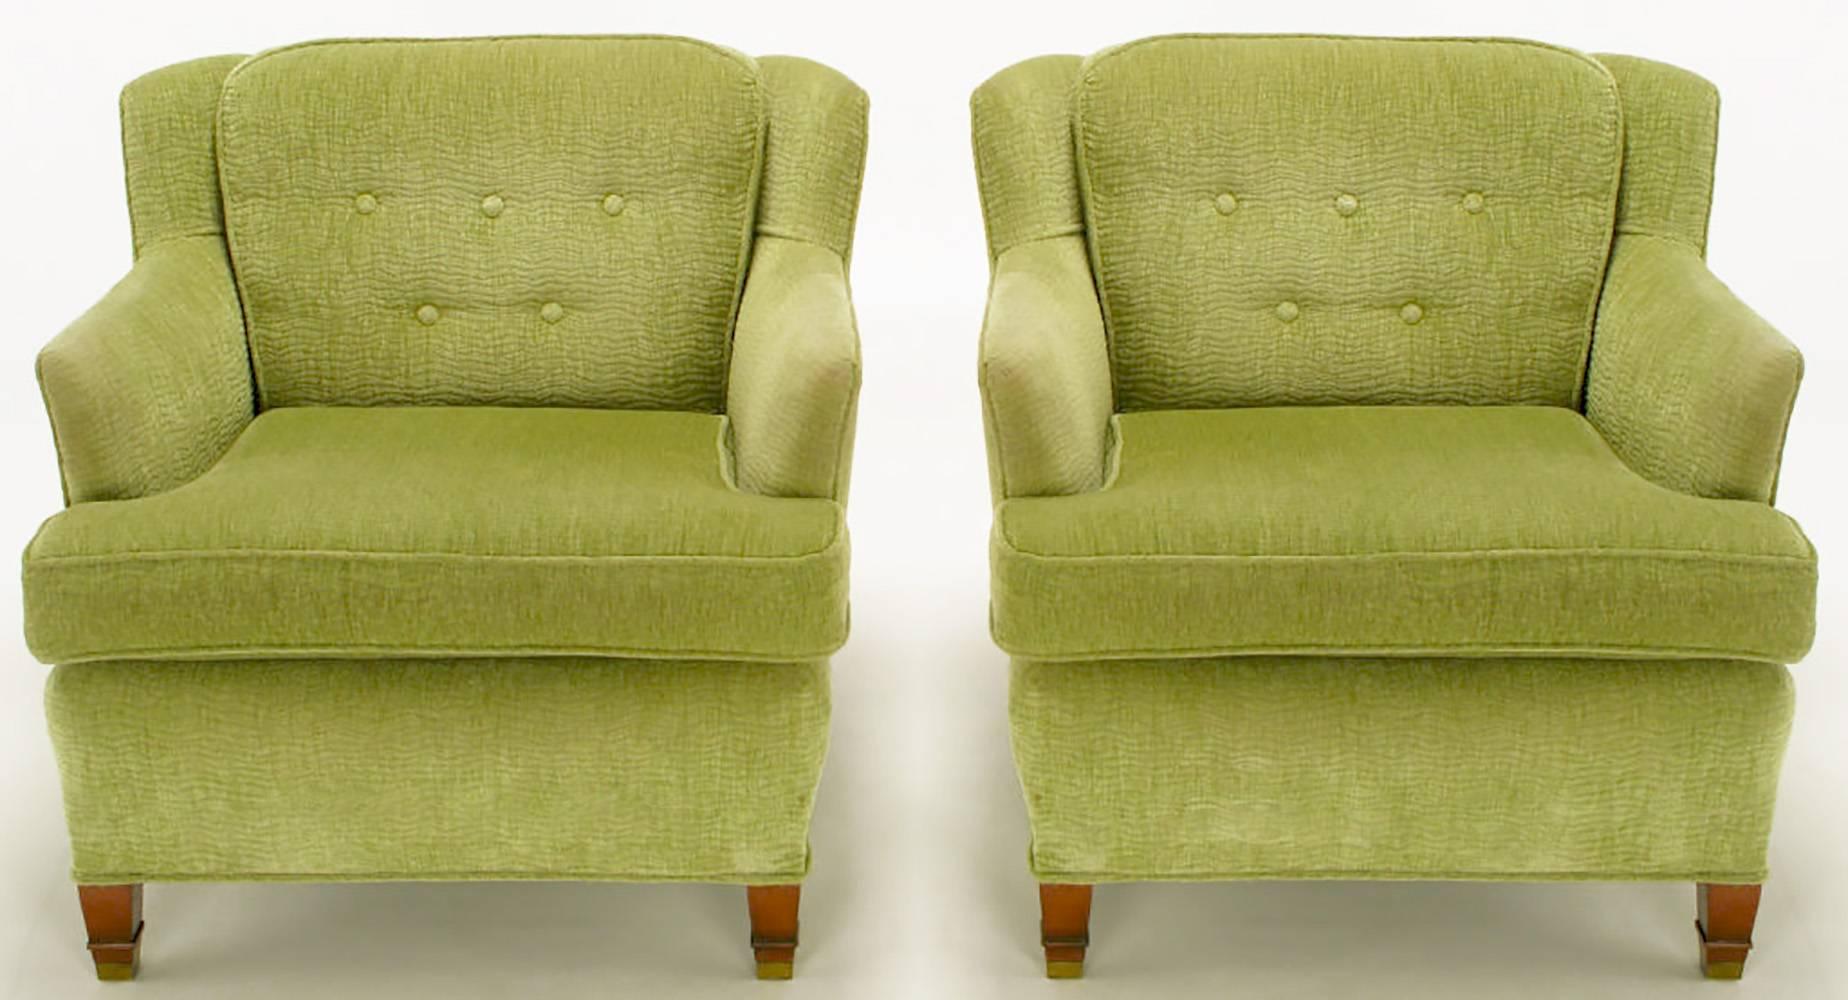 Pair of low lounge chairs with fixed button tufted back cushion and slight wing. Loose seat cushion, mahogany legs with raised detail and brass sabots to the front. Upholstered in a sage colored, cut to stripe, chenille.